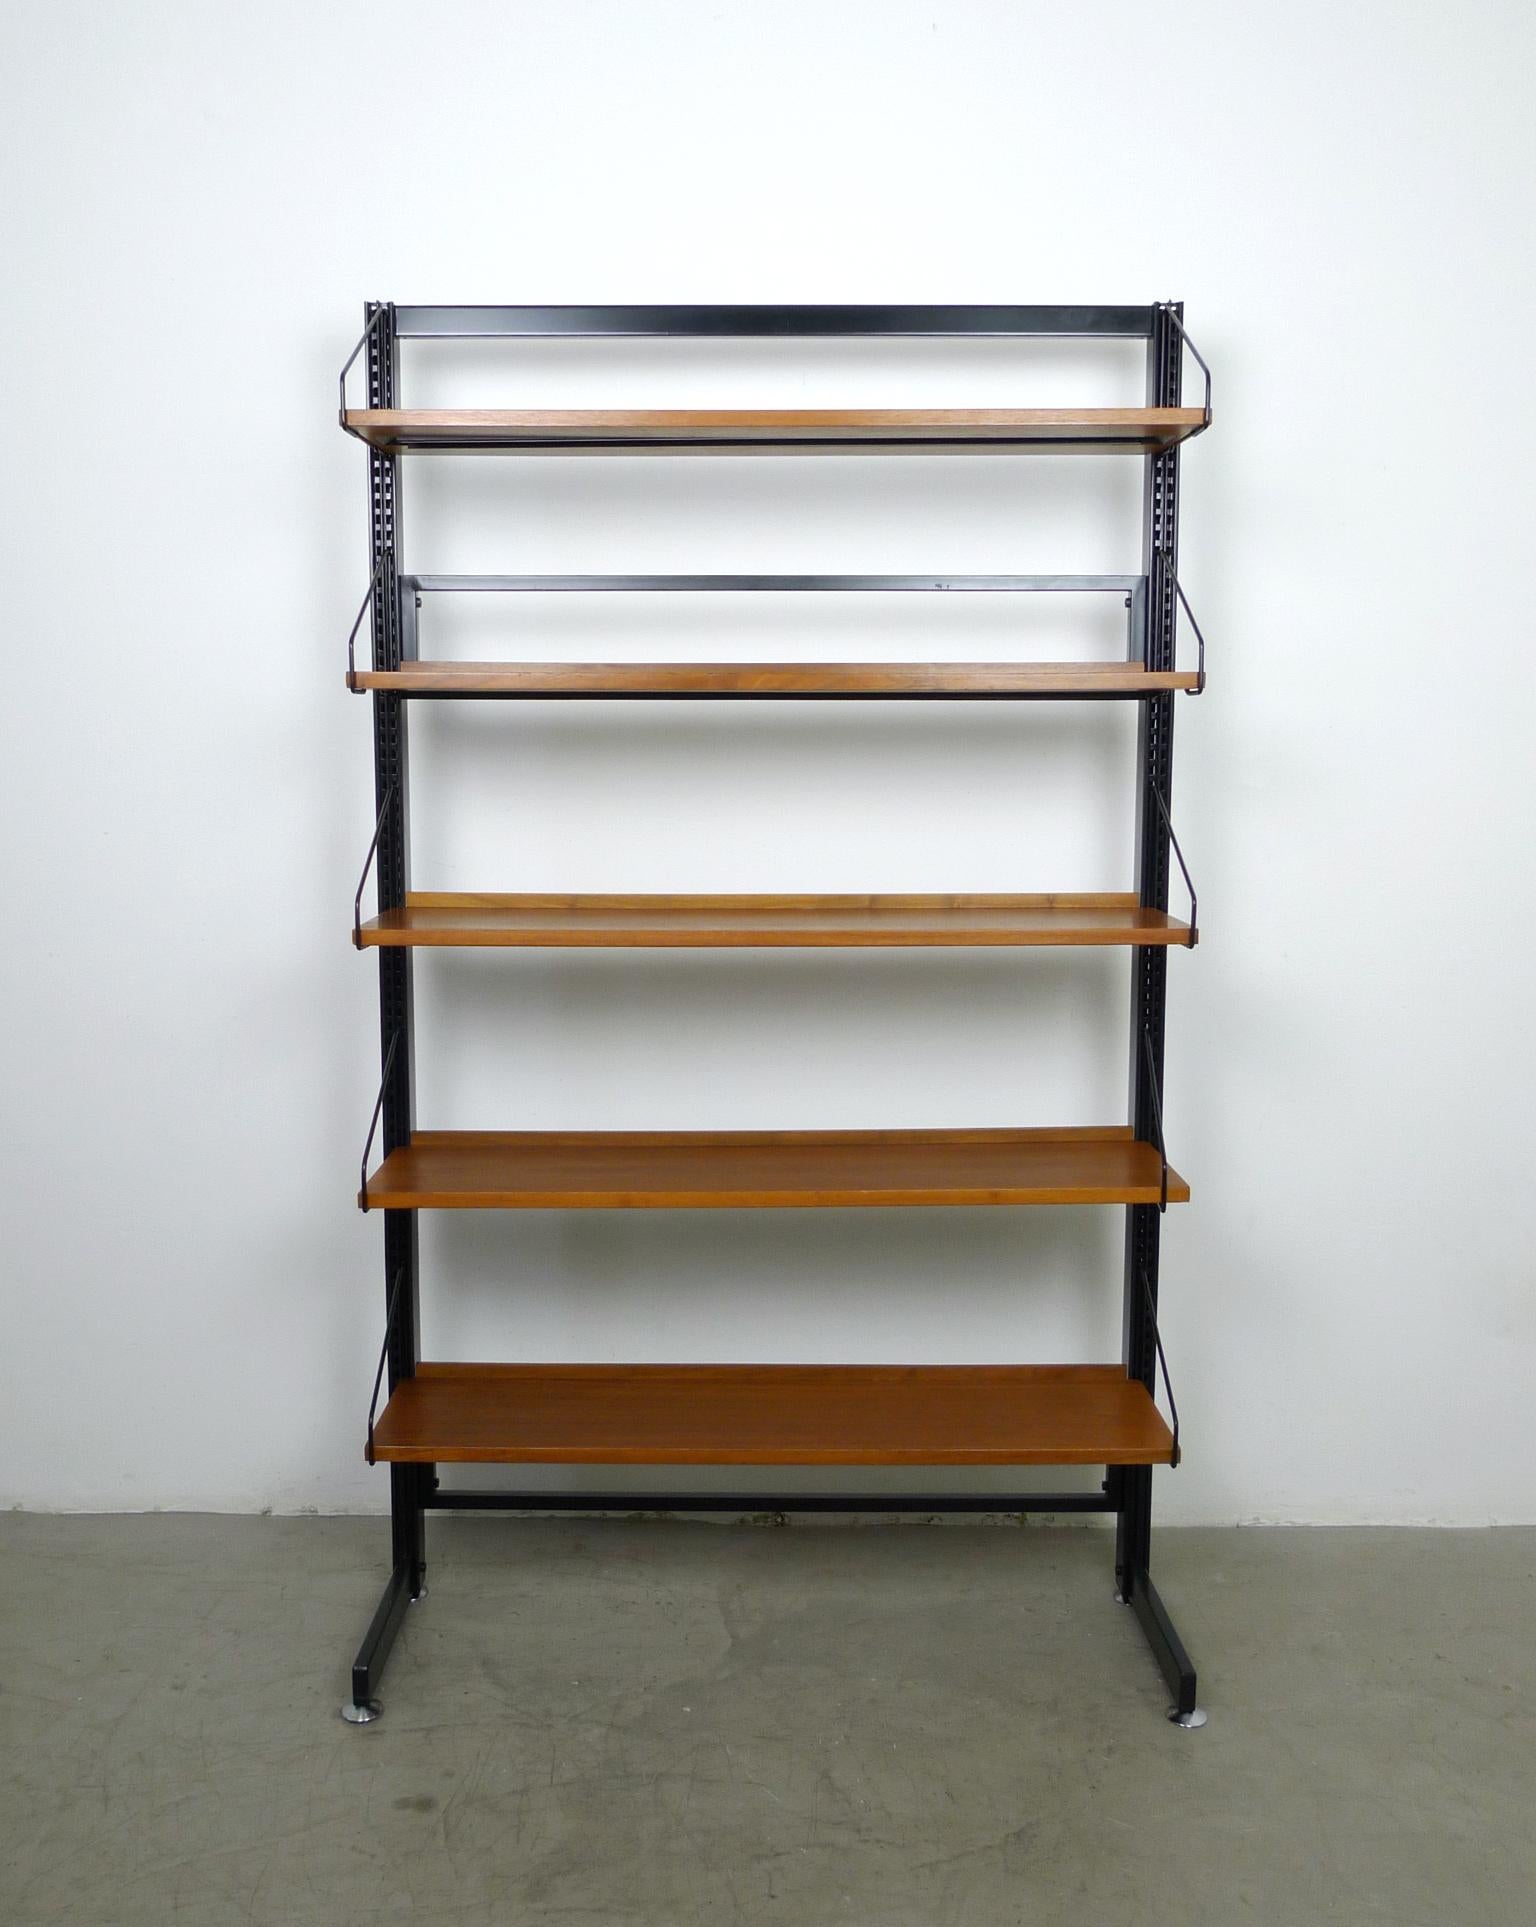 Freestanding floor bookcase with five shelves made of walnut, which can be arranged in height as desired. The black-lacquered uprights are made of metal and have two silver screw feet on the right and left, which can compensate for minor unevenness